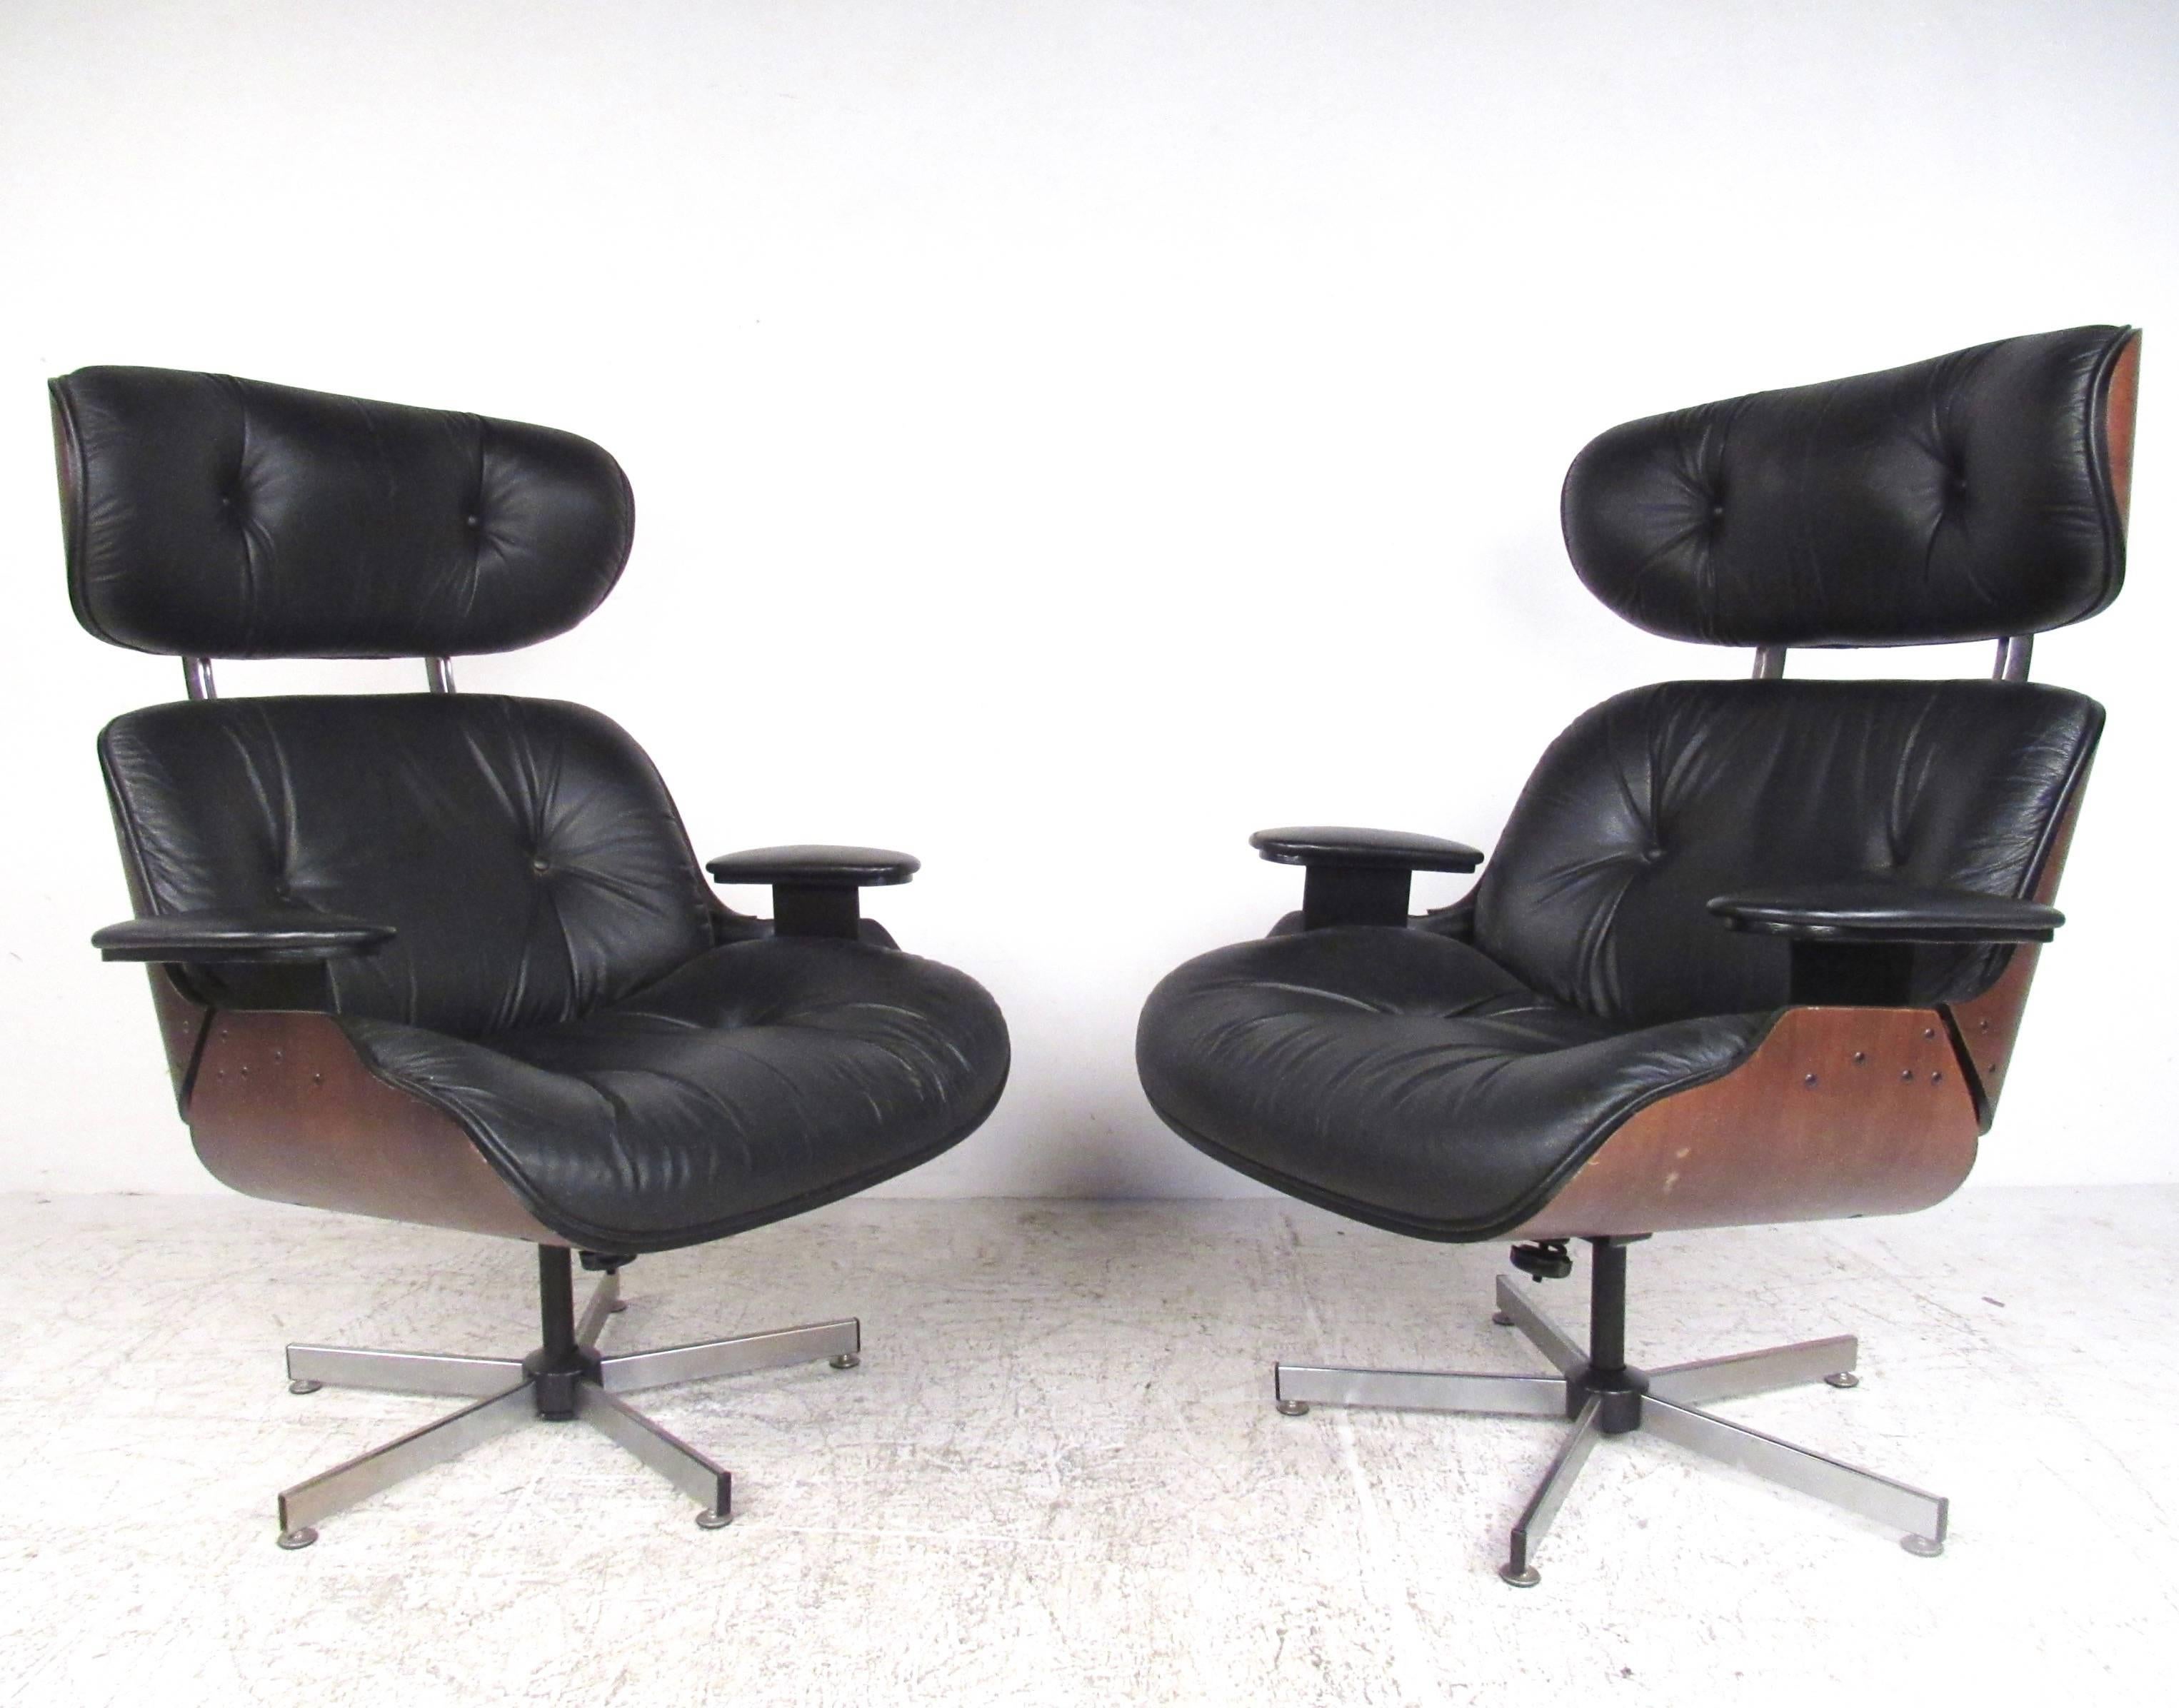 This pair of vintage George Mulhauser lounge chairs feature tufted black vinyl upholstery with stunning bentwood frames. Comfortably proportioned, these swivel lounge chairs come with matched ottomans and make a stylish Mid-Century addition to any